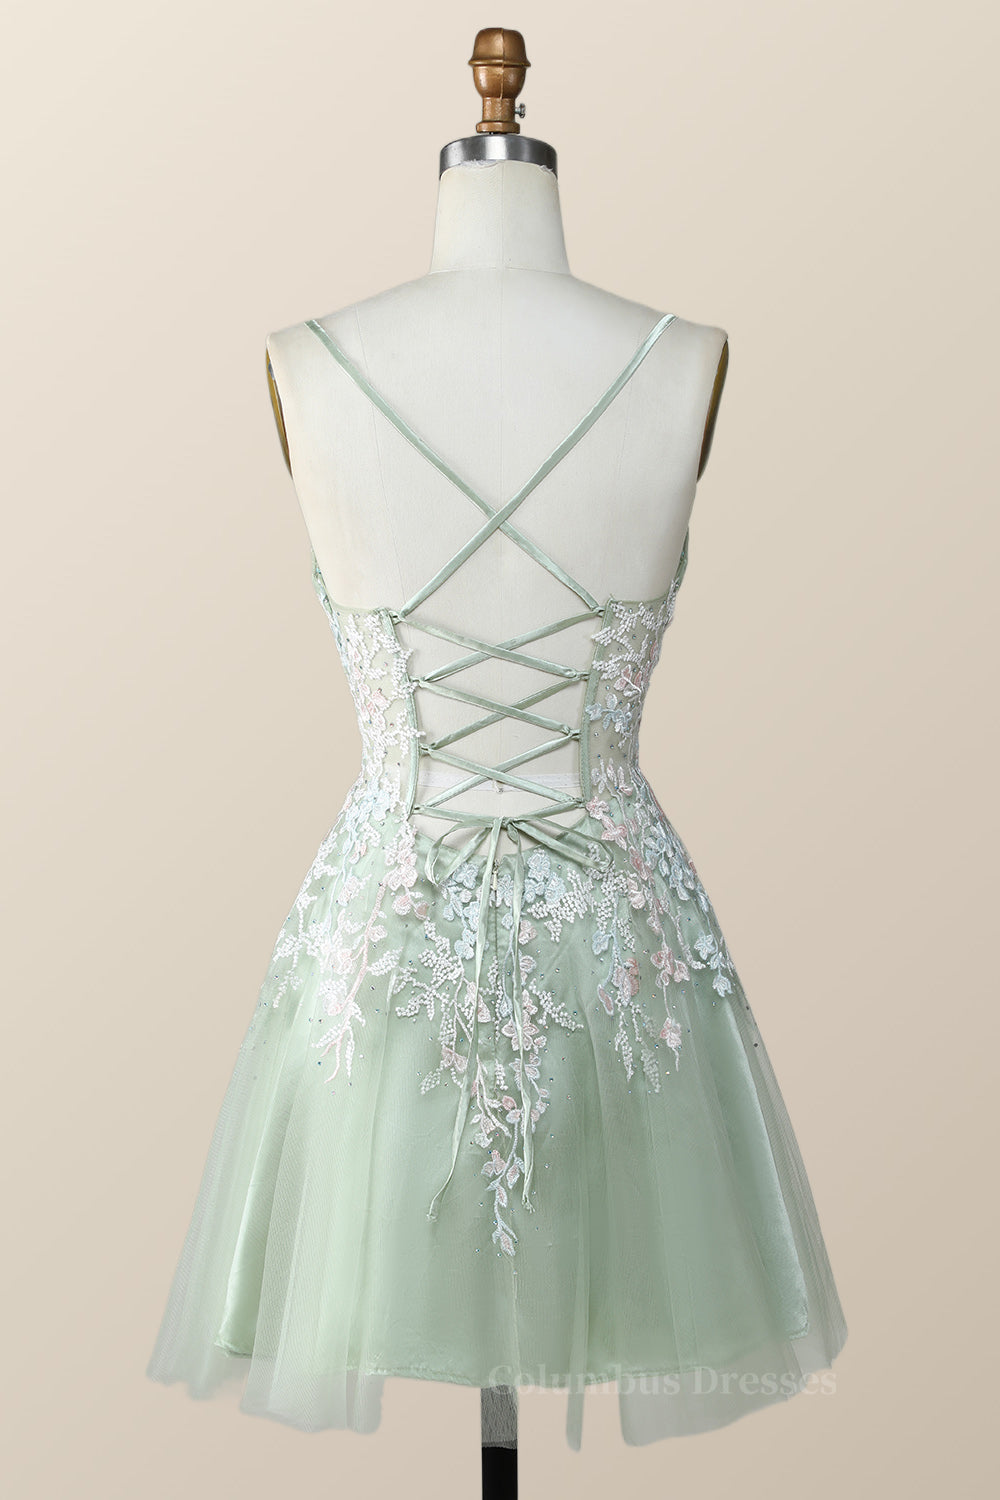 Party Dresses For Short Ladies, Sage Green Tulle Floral Embroidered A-line Homecoming Dress